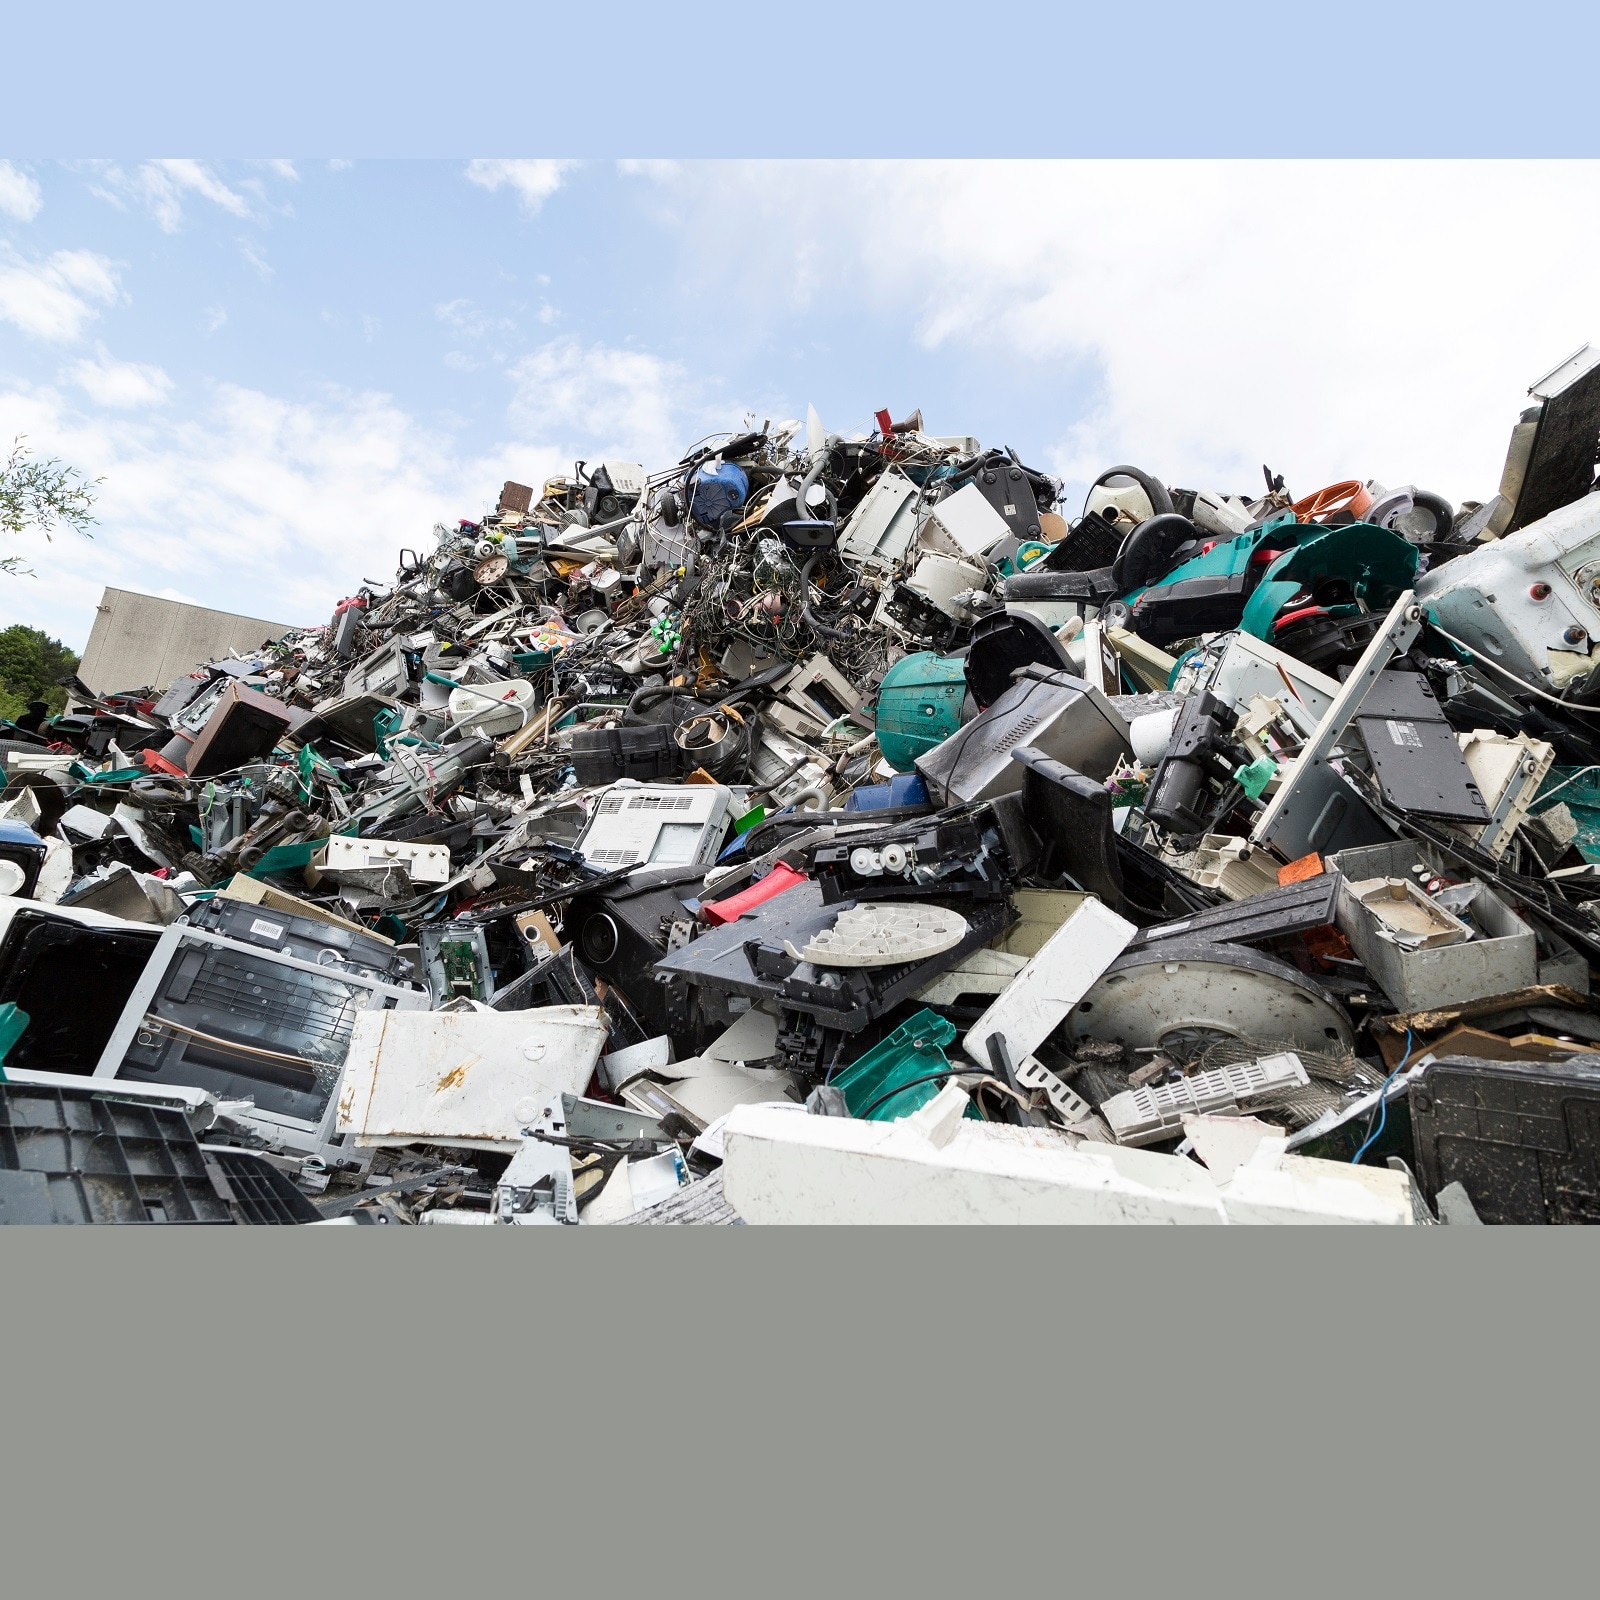 Science, Research, Environment, Waste, E-Waste, E Waste, E Waste Management, Waste Management, Reuse, Recycle, Repair,